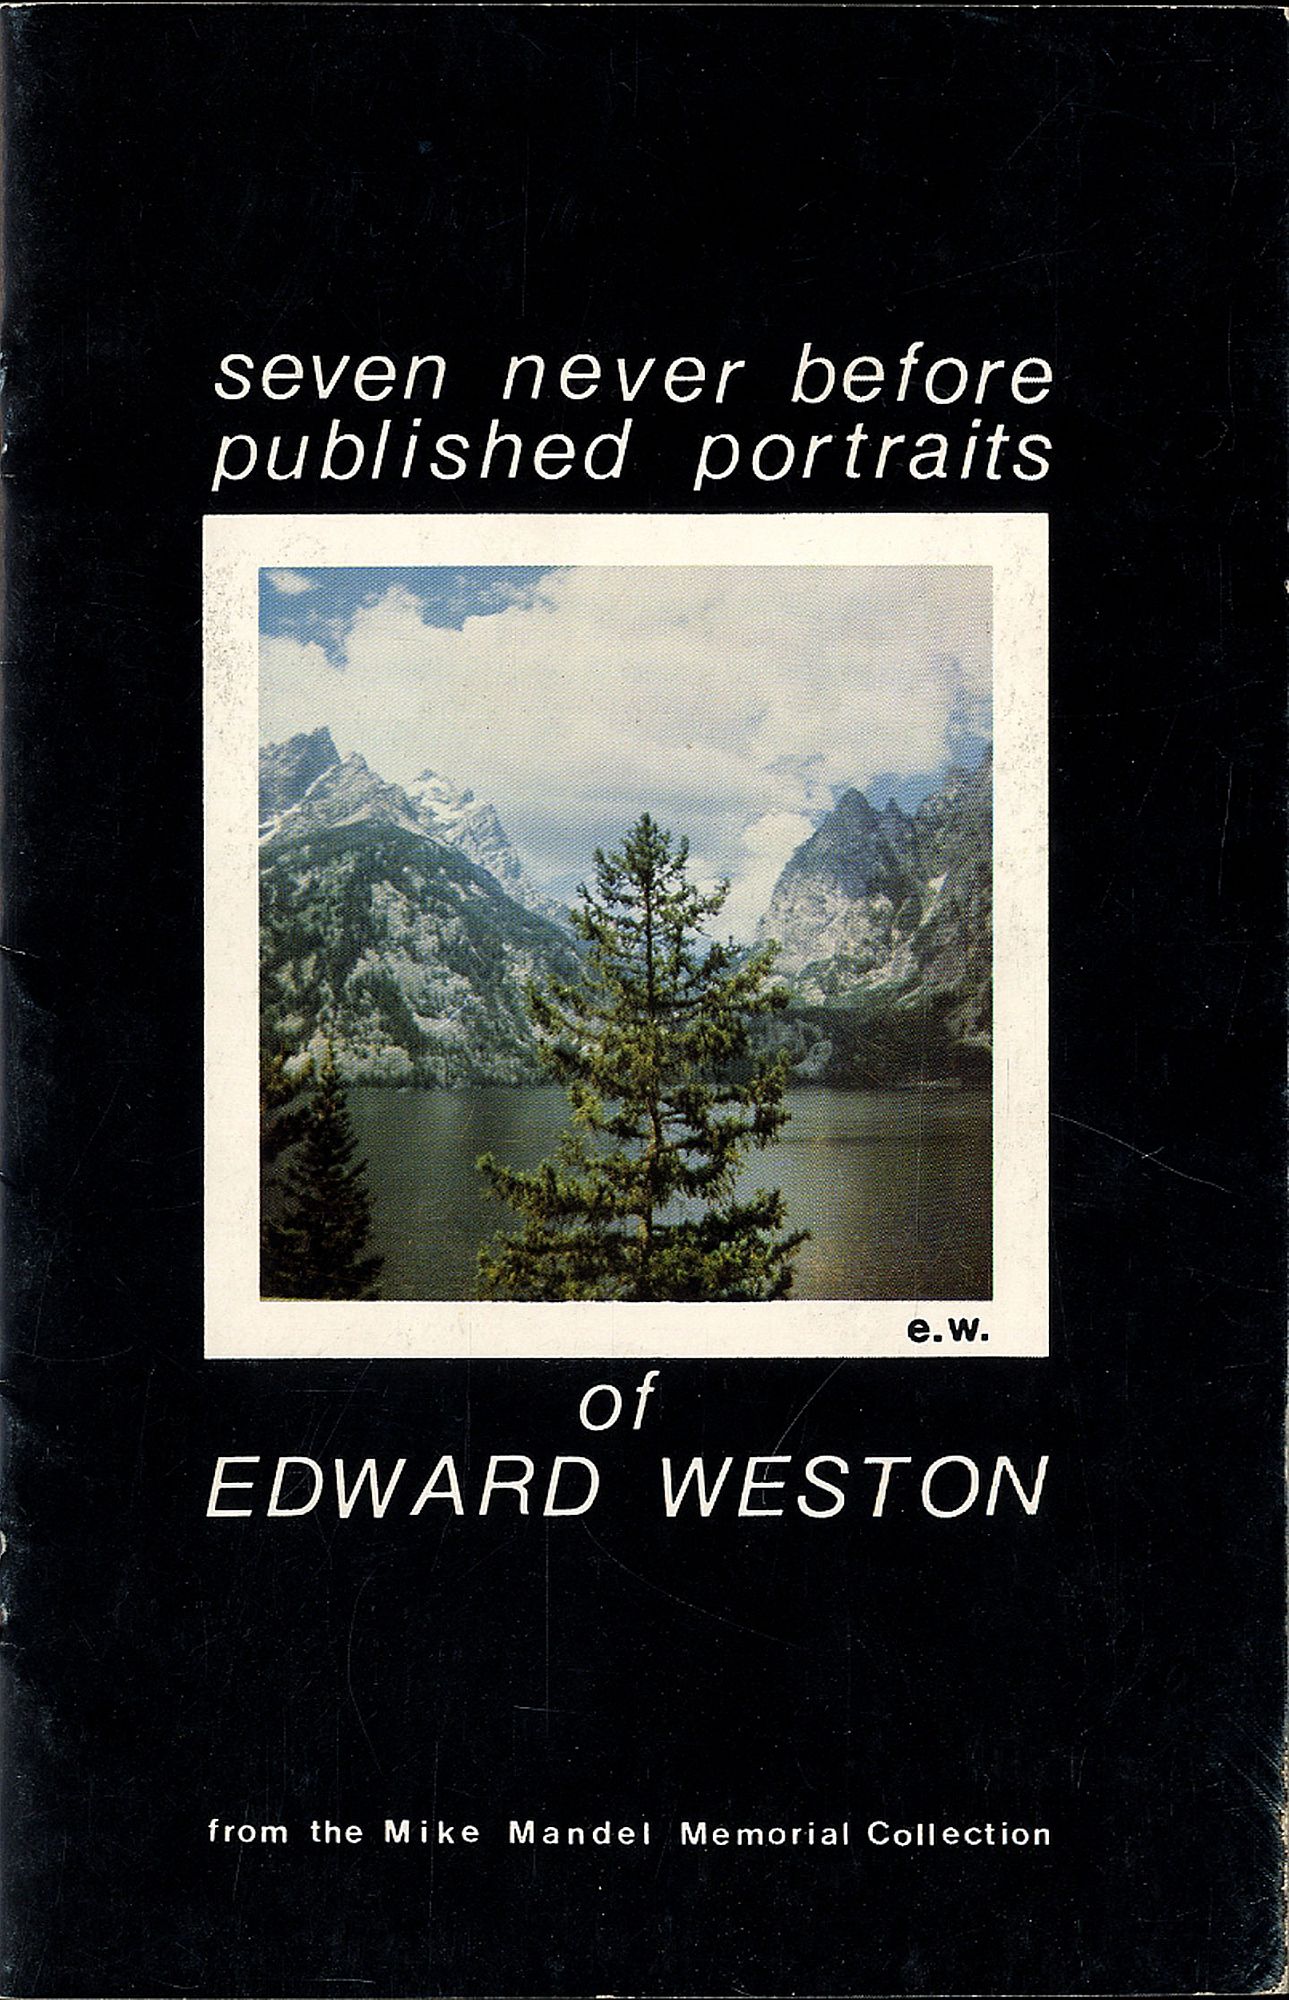 Mike Mandel: Seven Never Before Published Portraits of Edward Weston, from the Mike Mandel Memorial Collection [SIGNED]